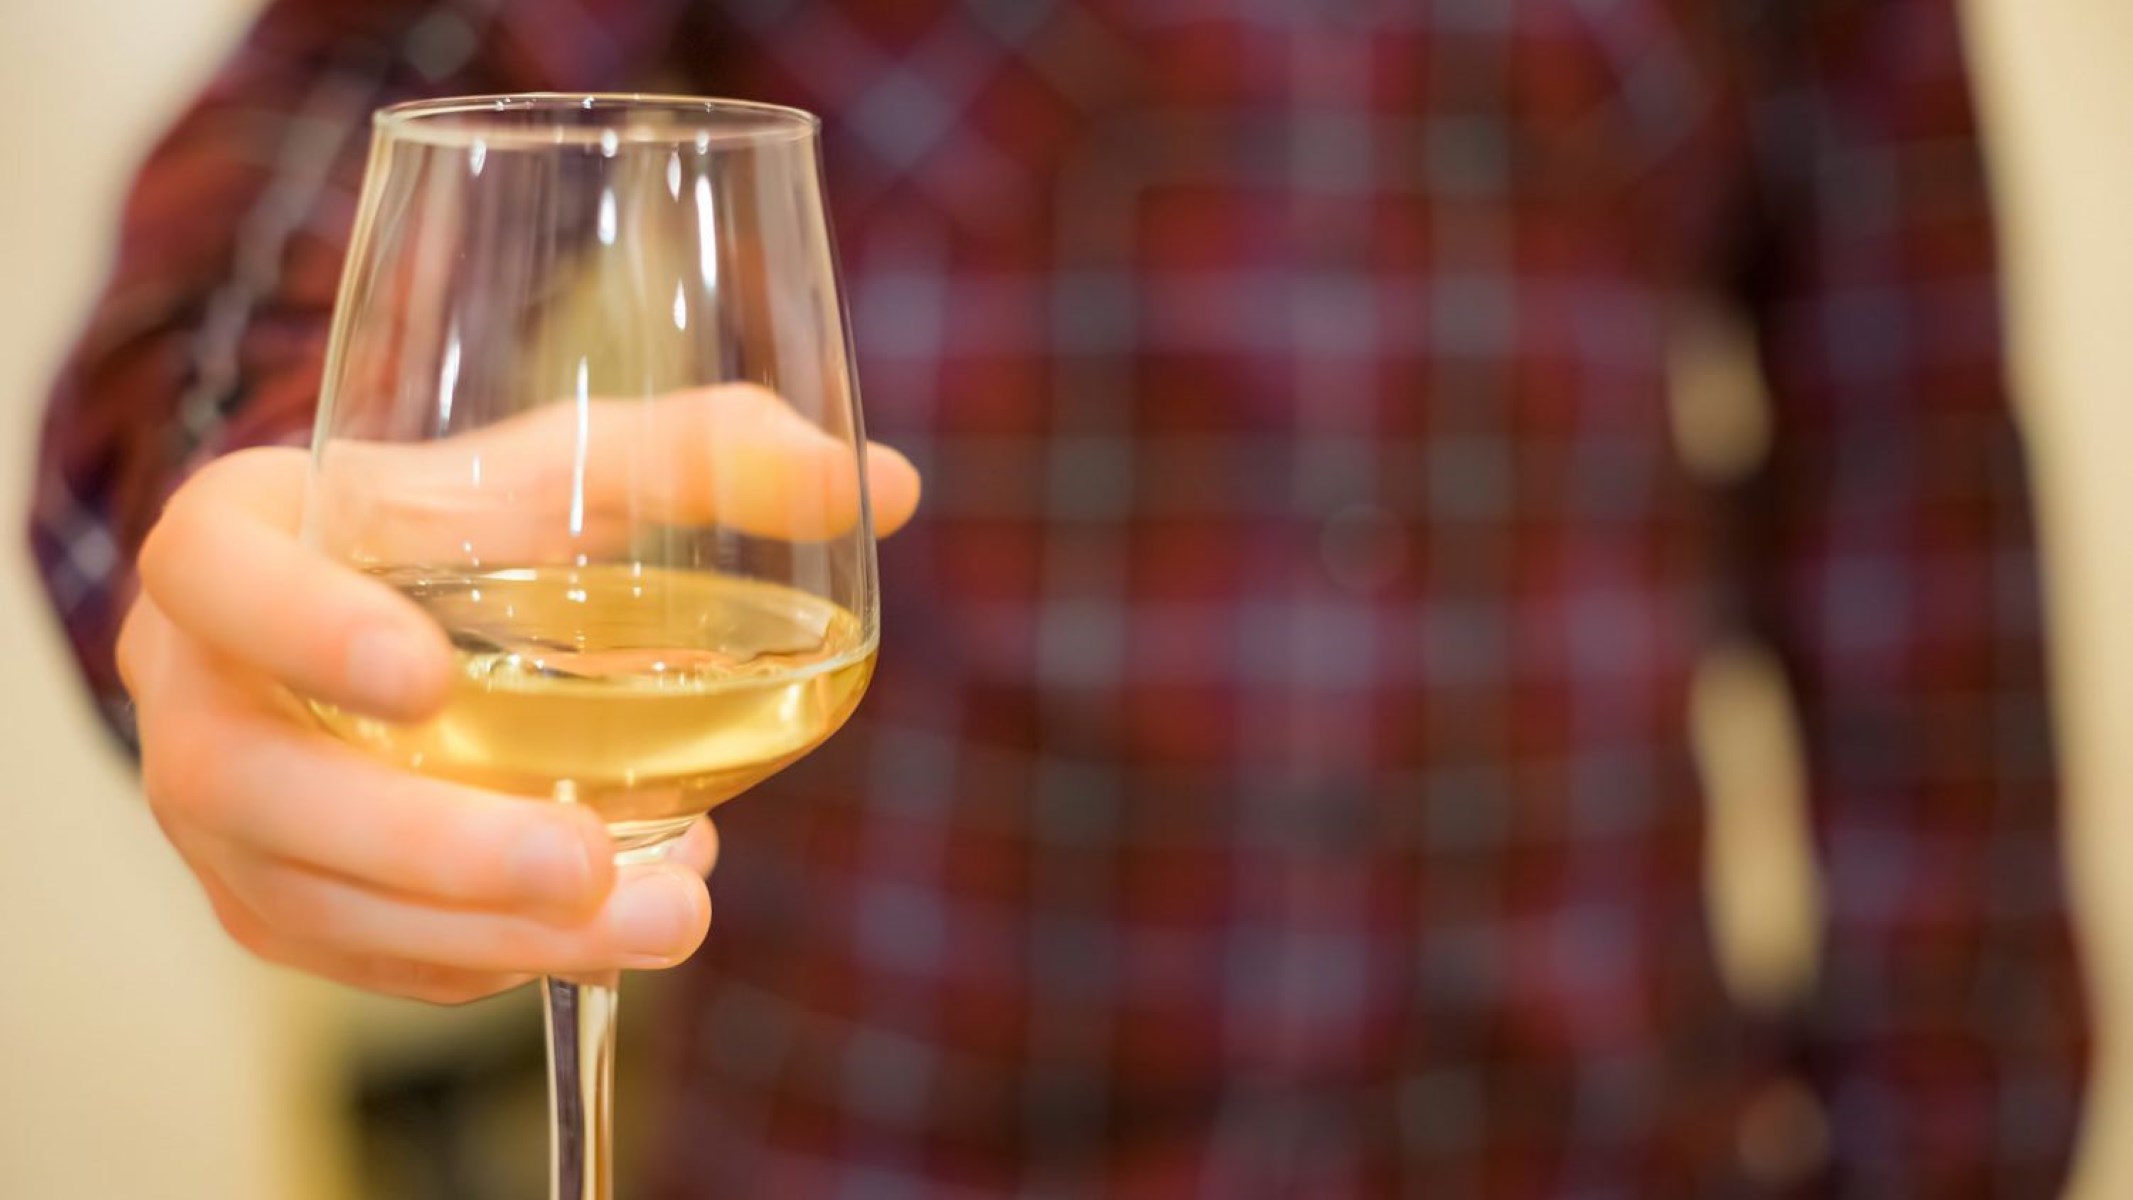 How To Hold Wine Glass